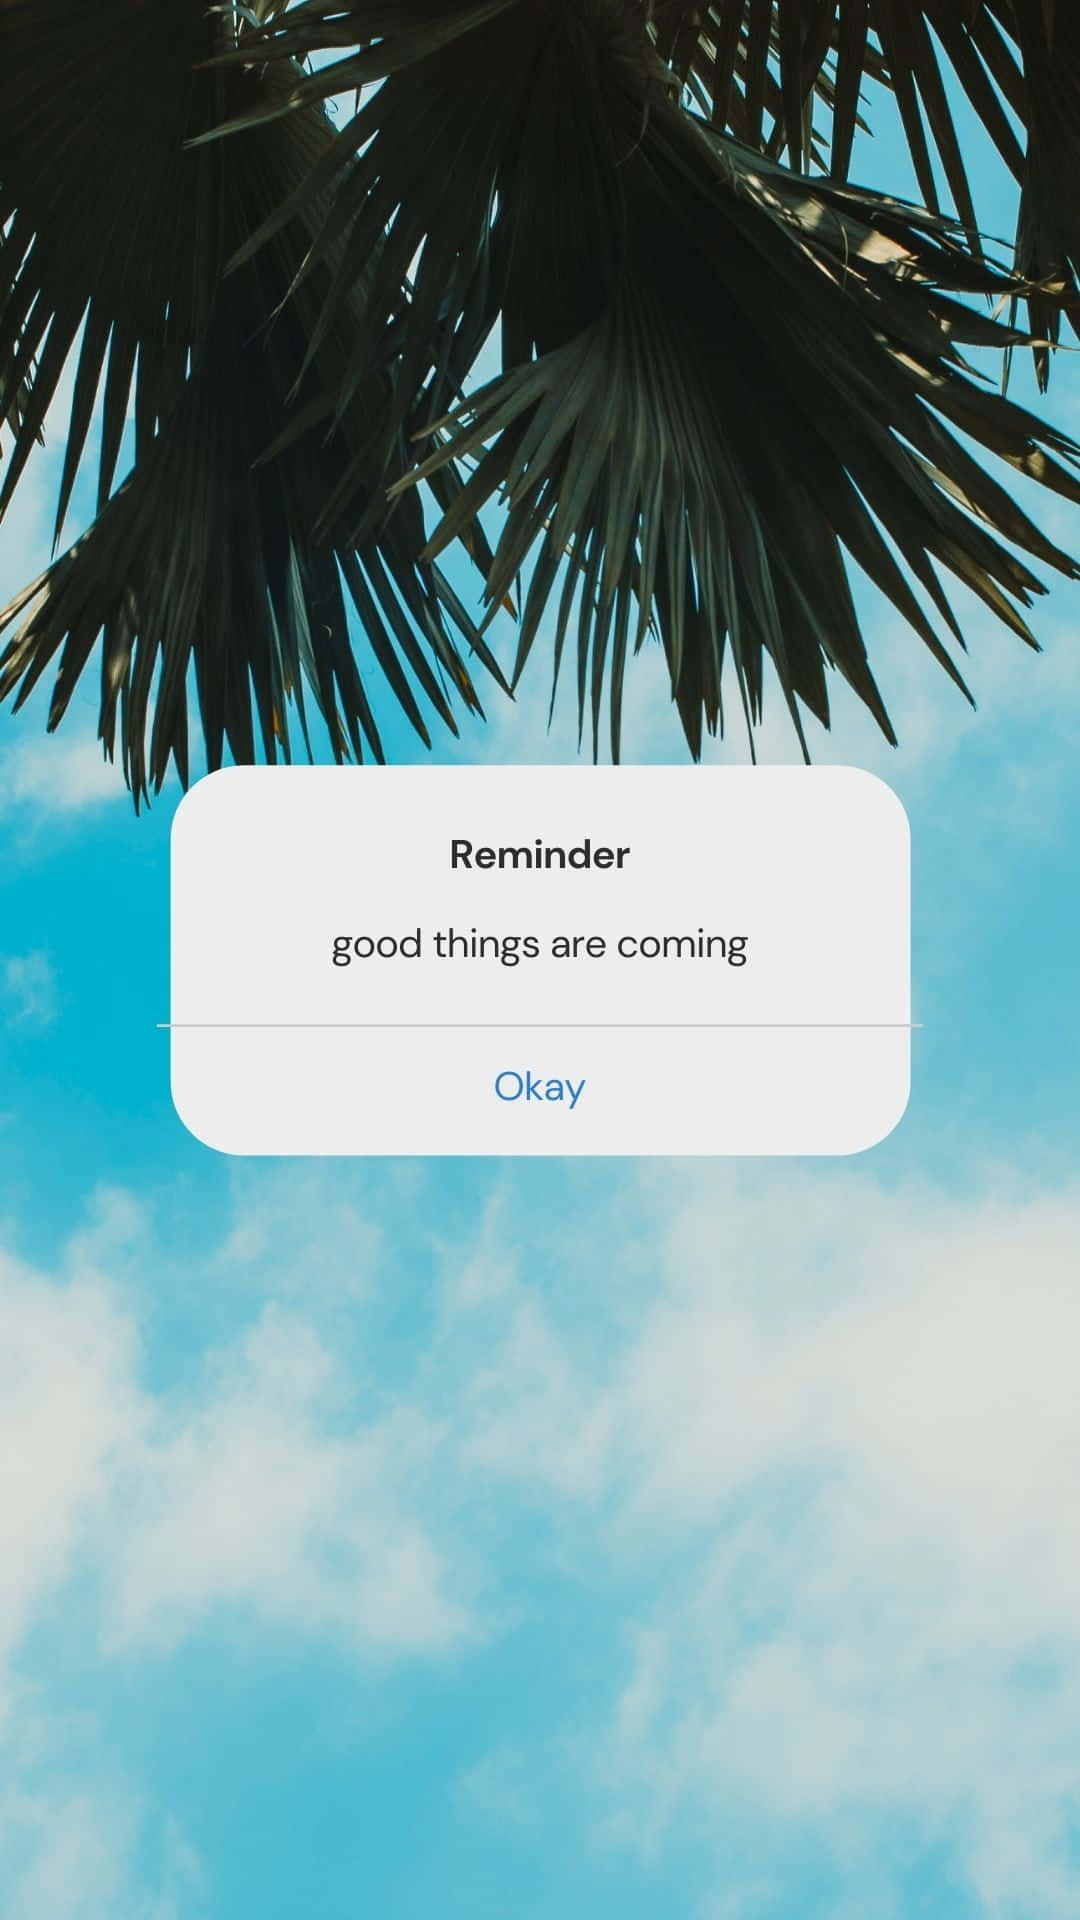 Keep your tasks and goals organized with reminders